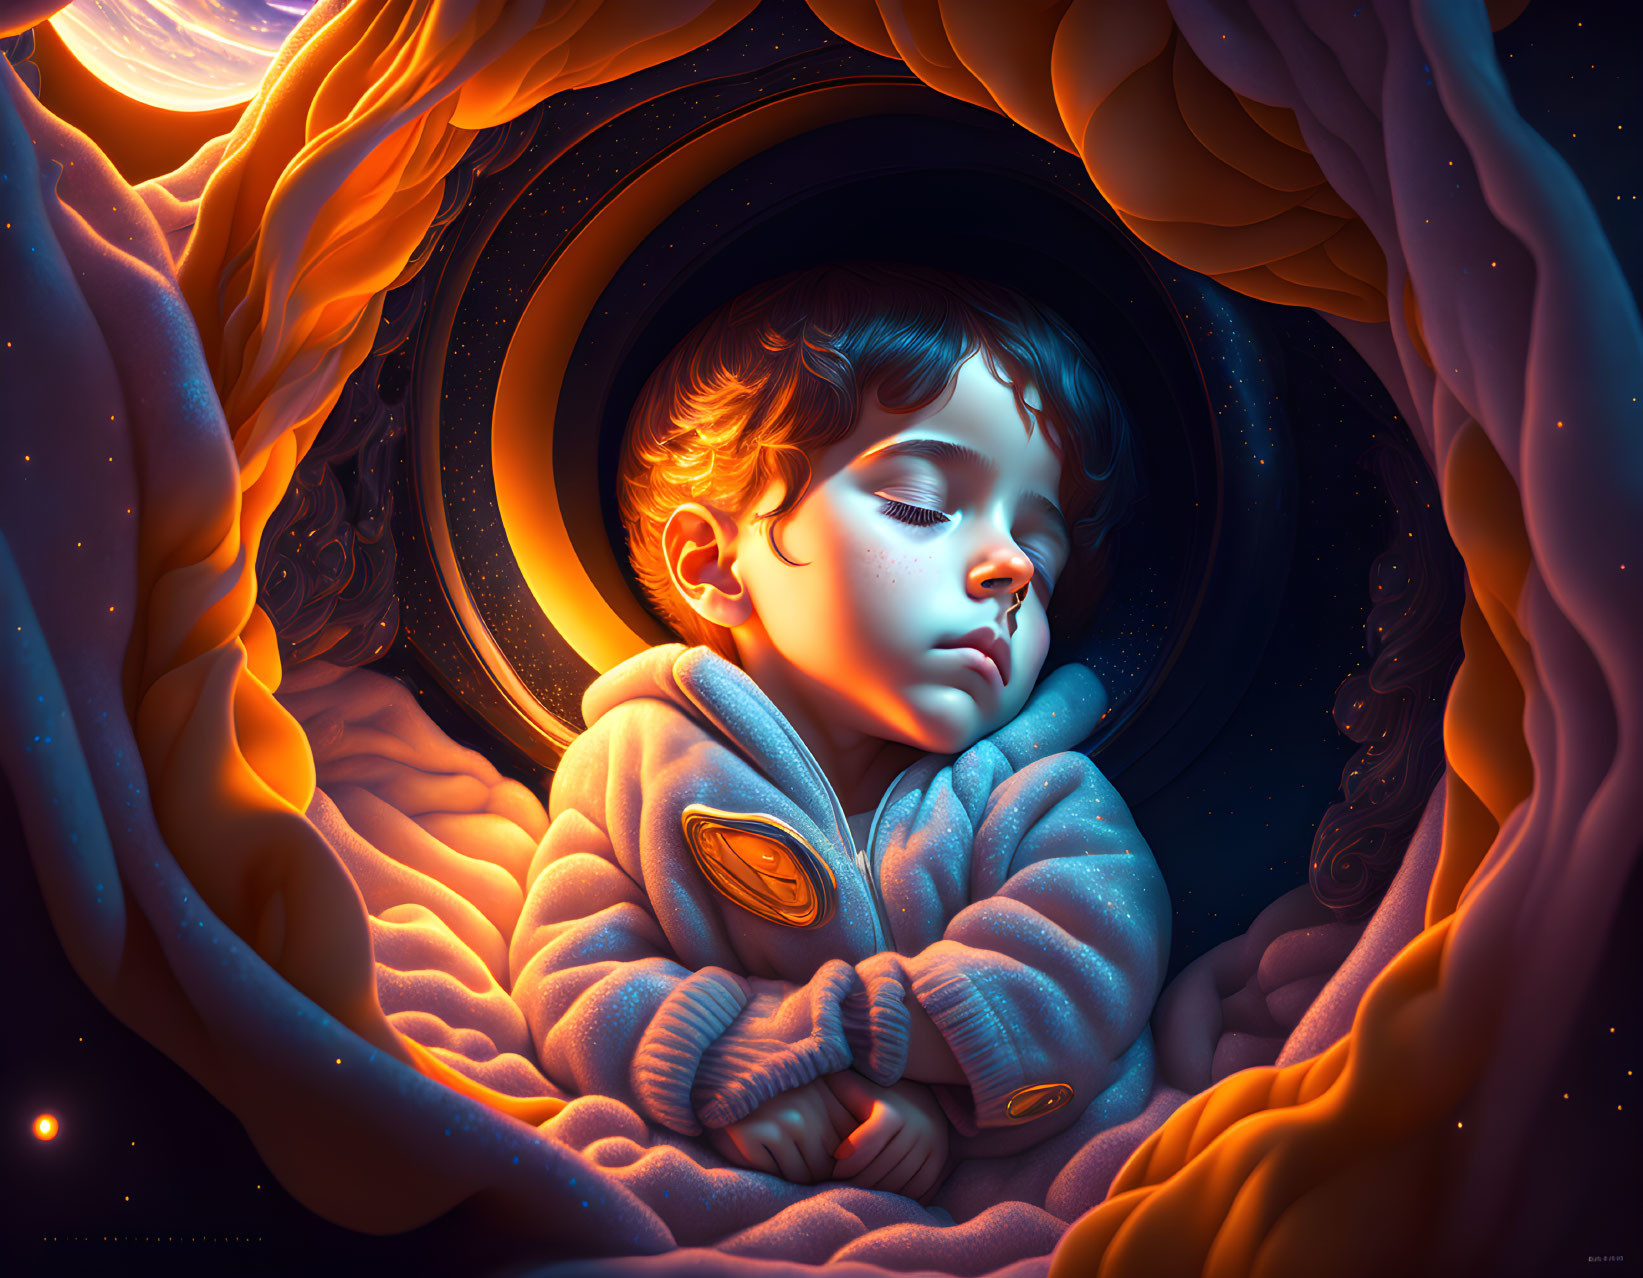 Sleeping Child Surrounded by Warm Cosmic Swirls and Stars